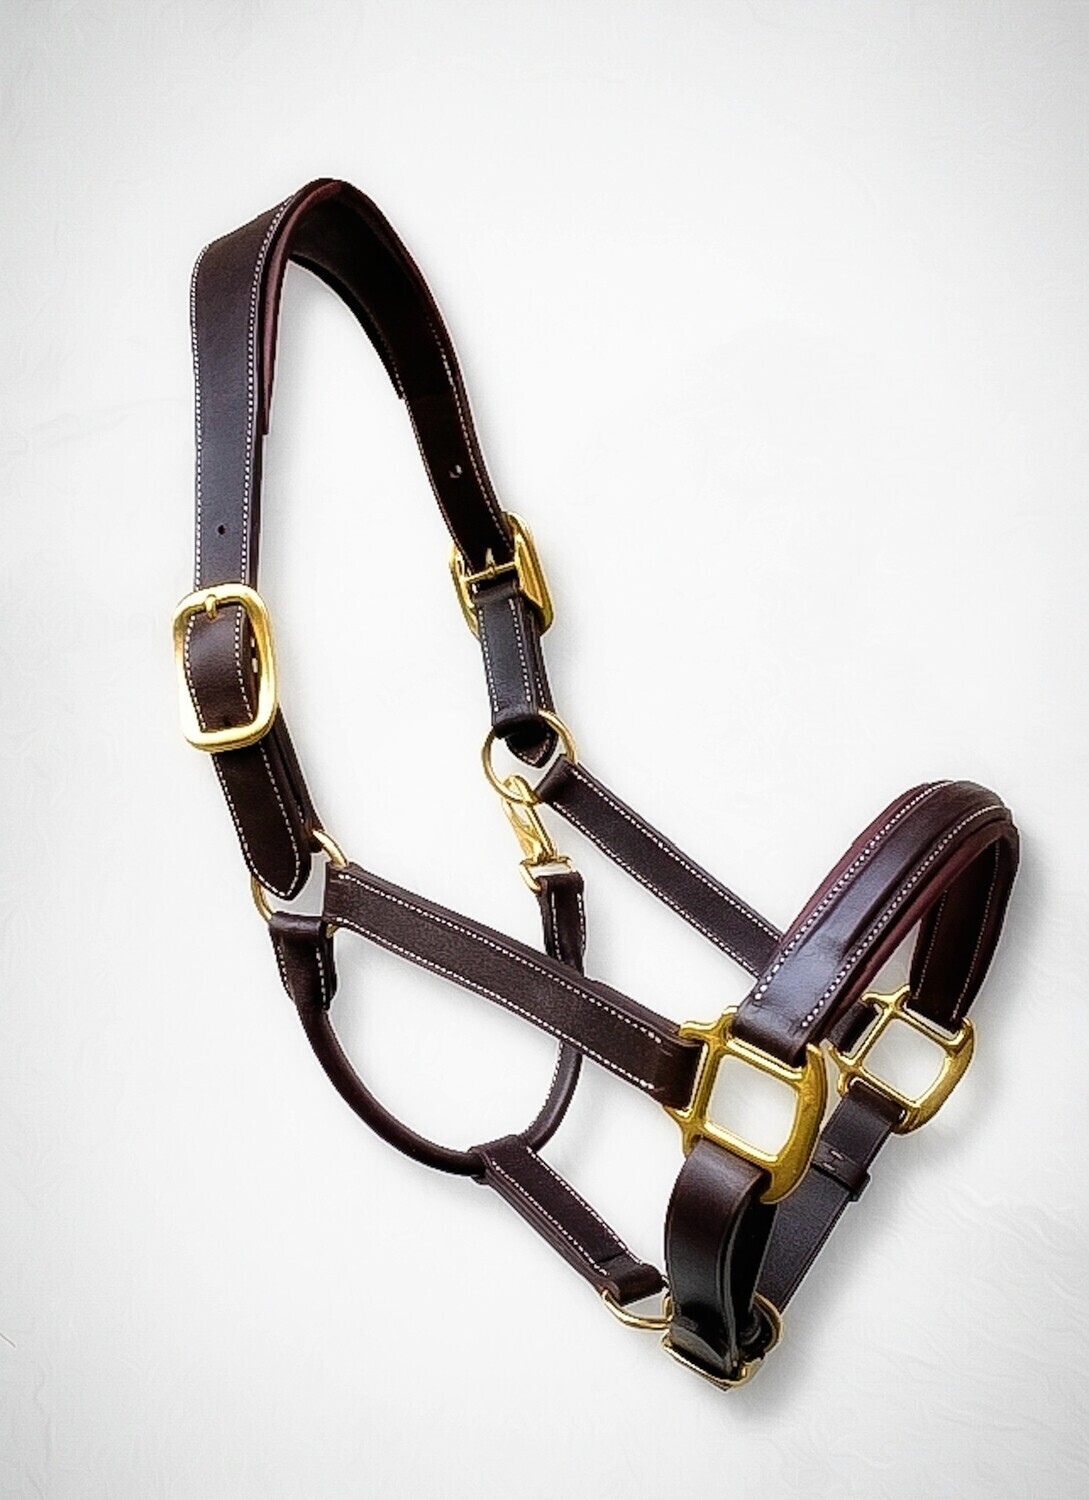 Anatomical leather halter OS